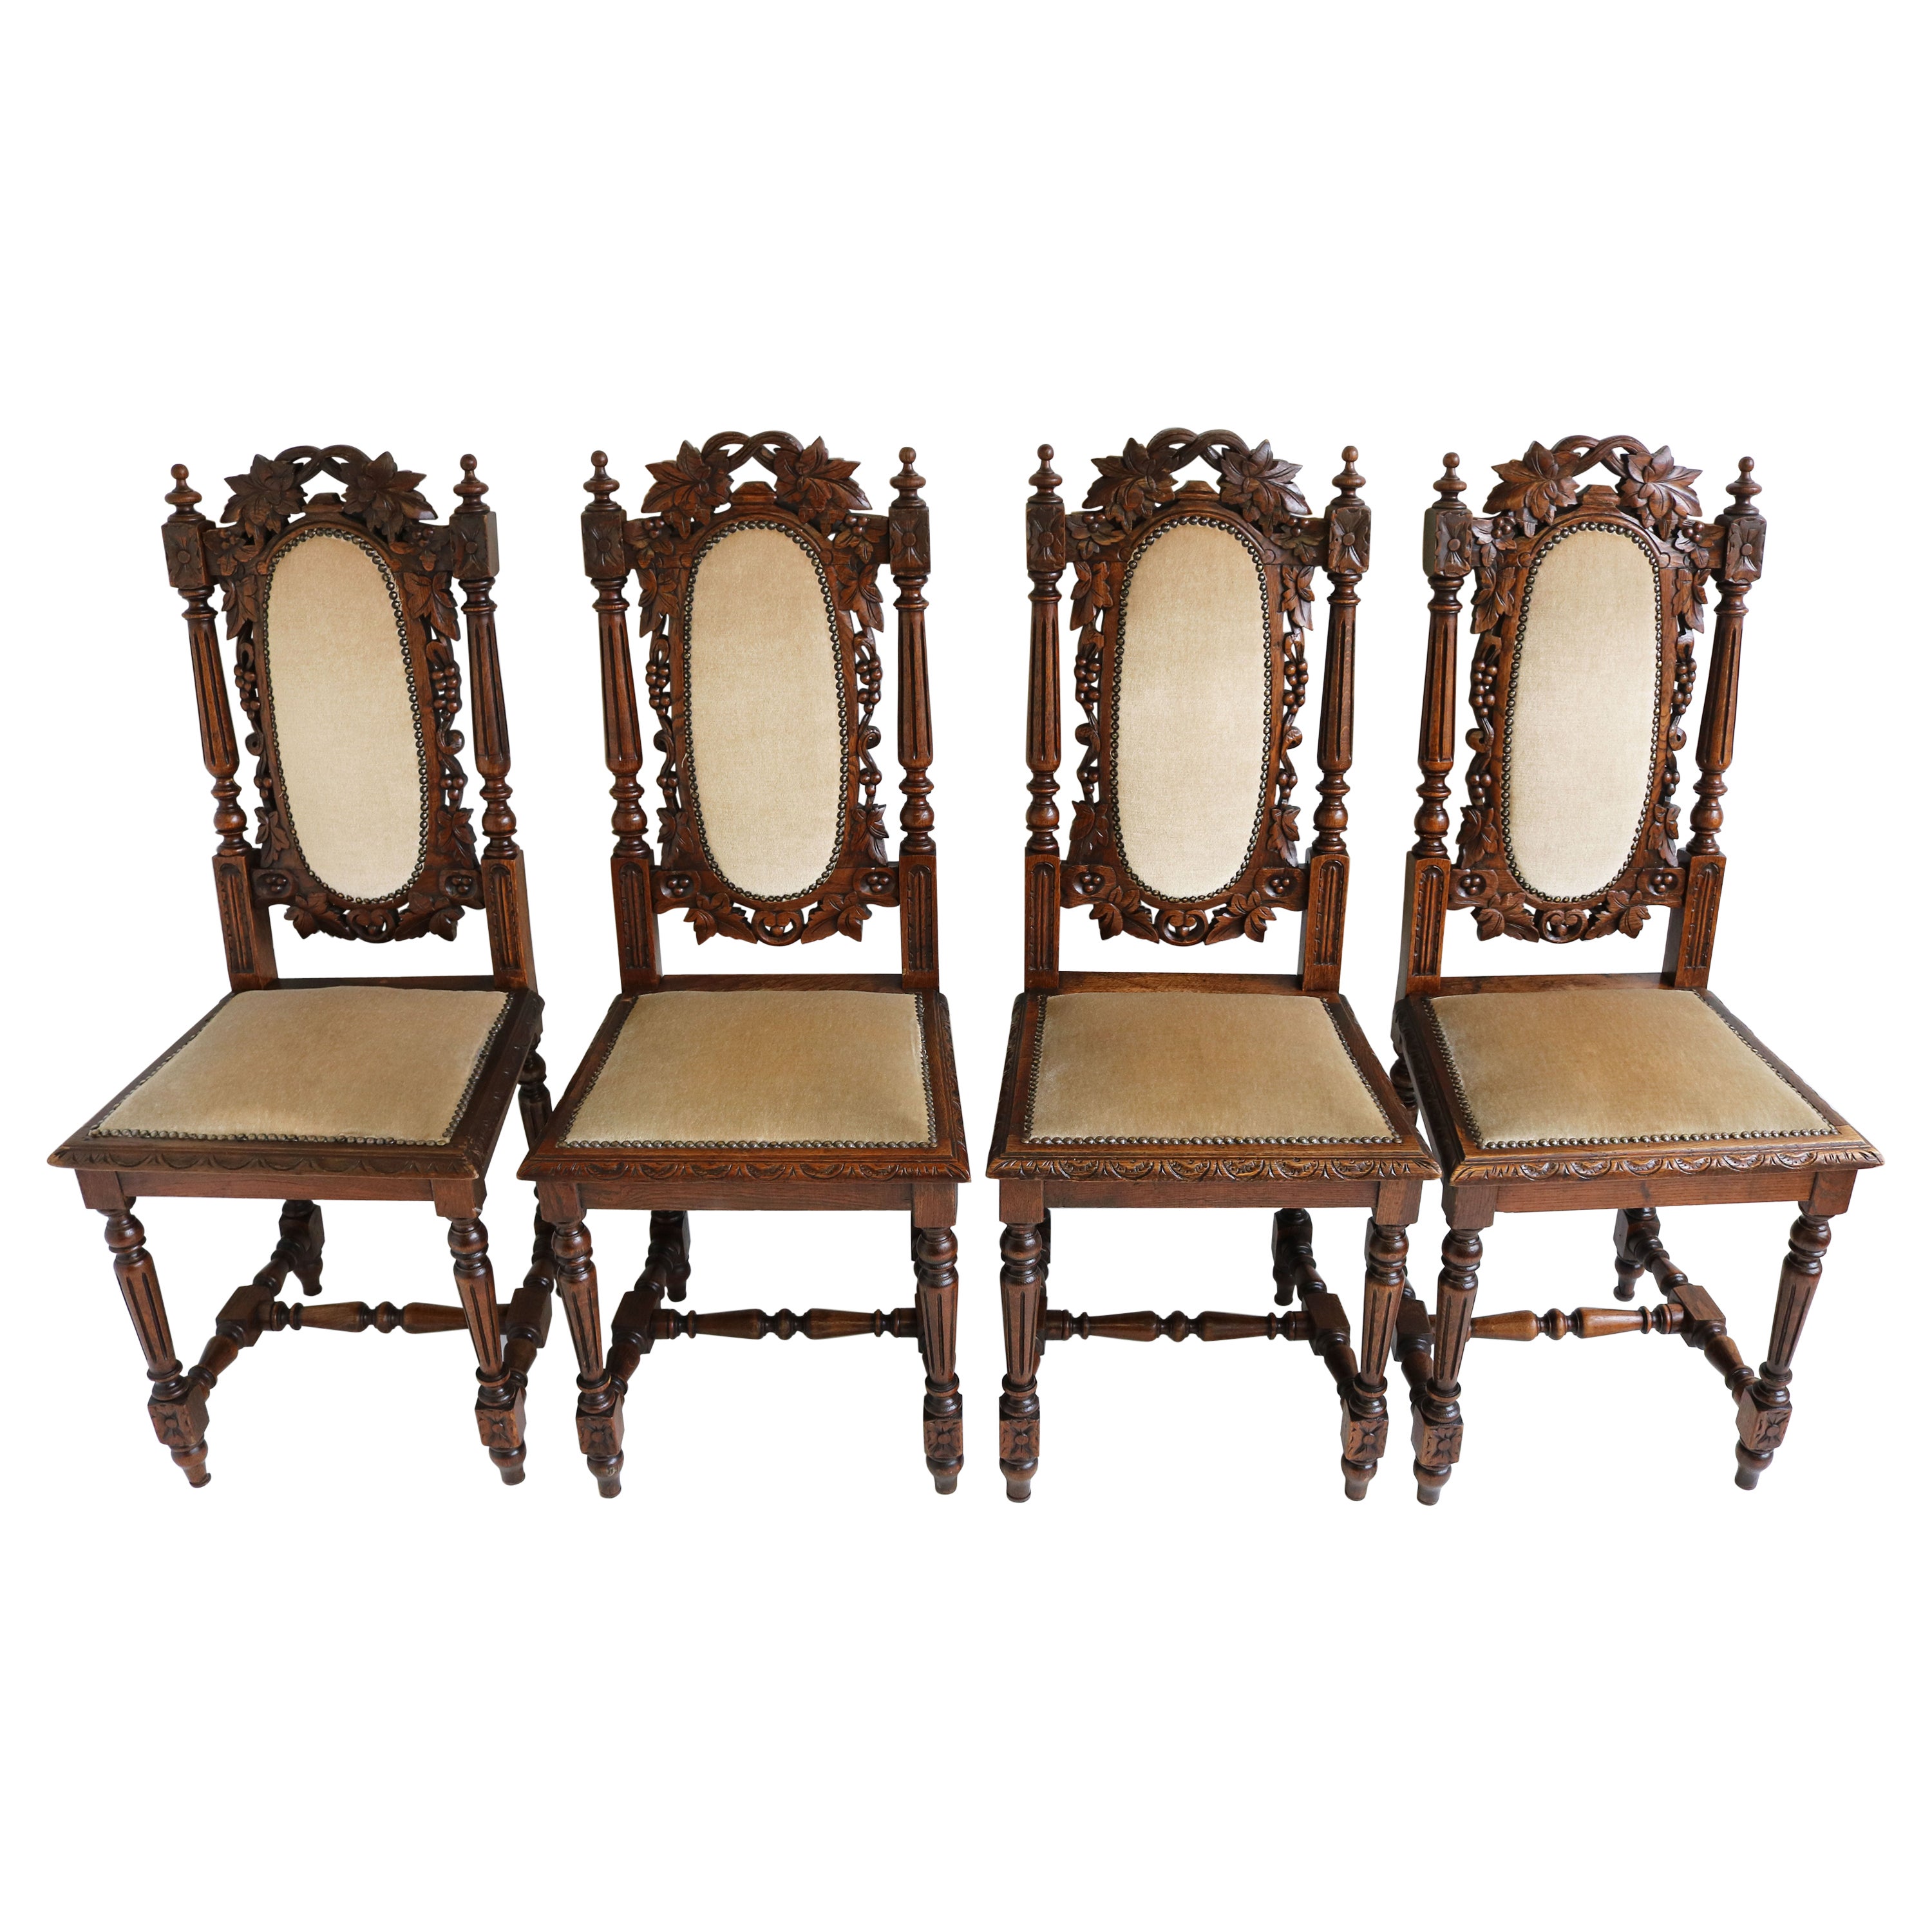 Set of 4 French Renaissance Revival Hunting Style Chairs Carved Oak Black Forest For Sale